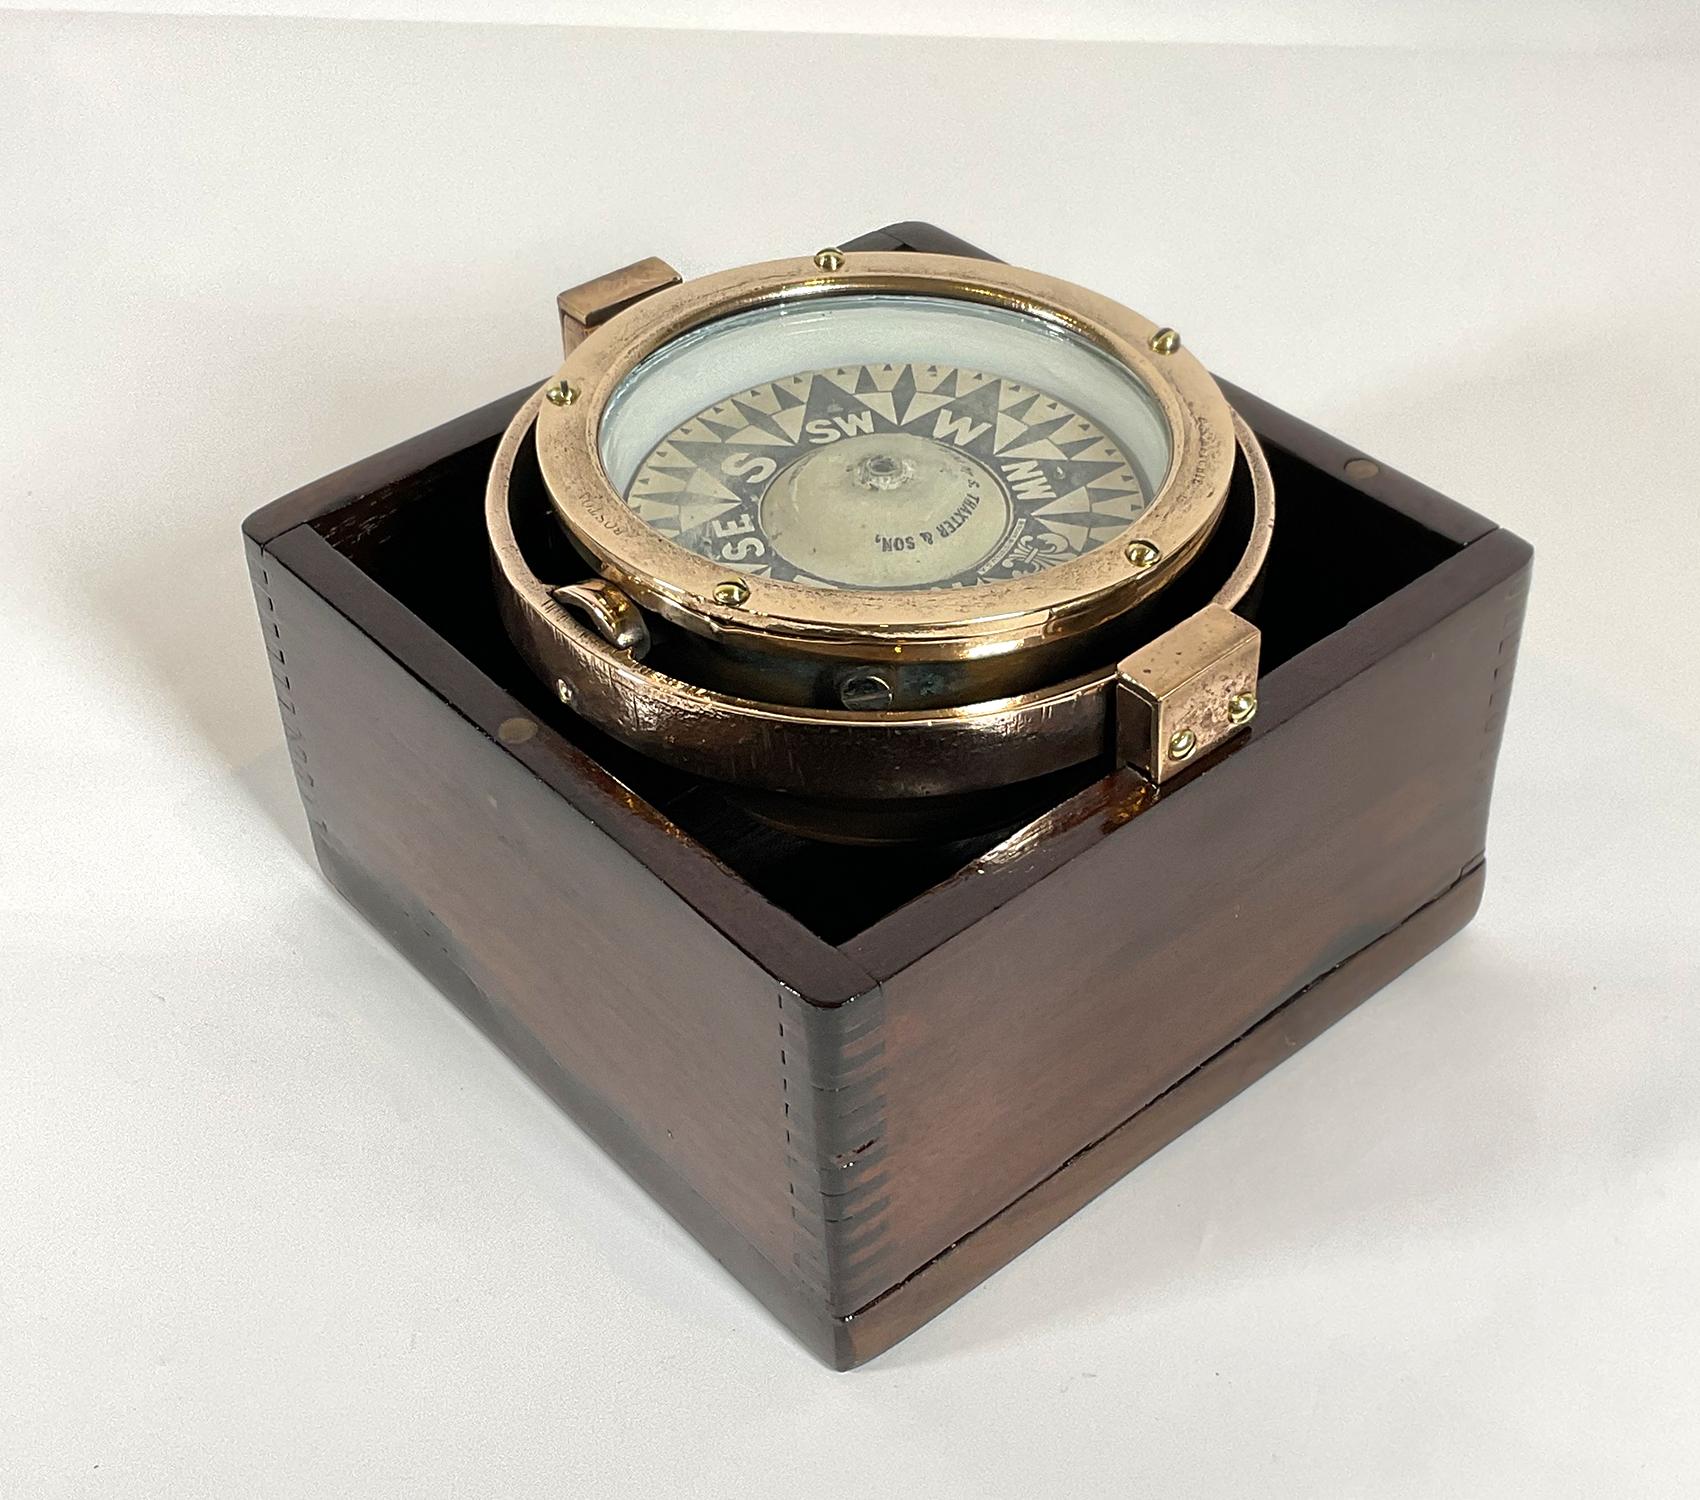 Solid brass gimballed boat compass fitted to a dovetailed varnished box. This is a 19th century compass from Samuel Thaxter & Son in Boston. Awesome Nautical display piece from an infamous Boston maker. 

Weight: 6 LBS
Overall dimensions: 5